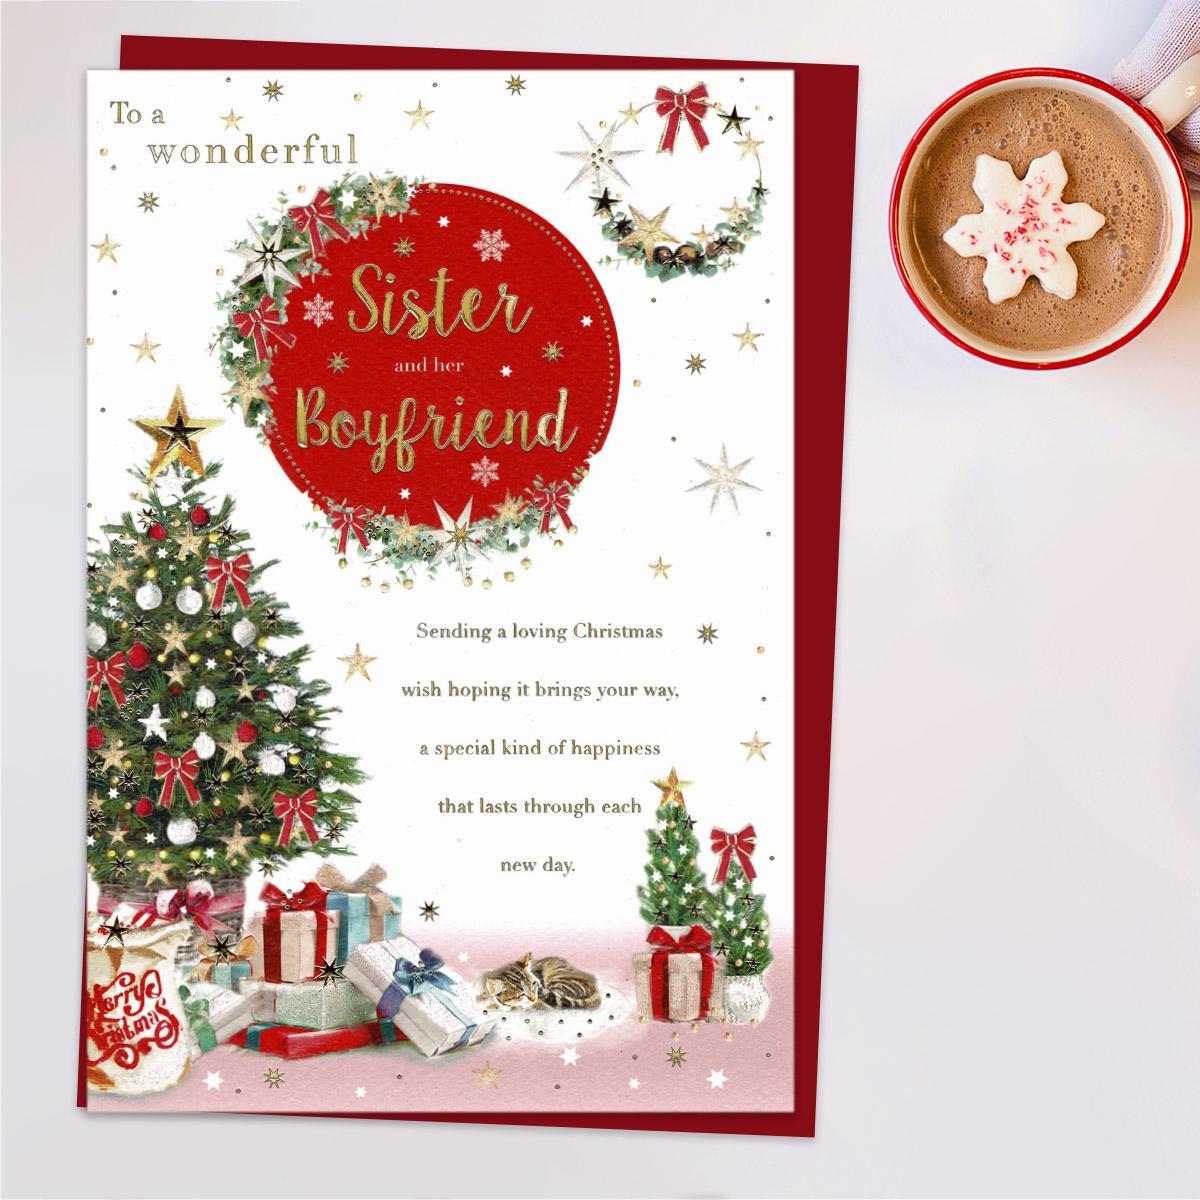 Wonderful Sister And Boyfriend Christmas Card Front Image